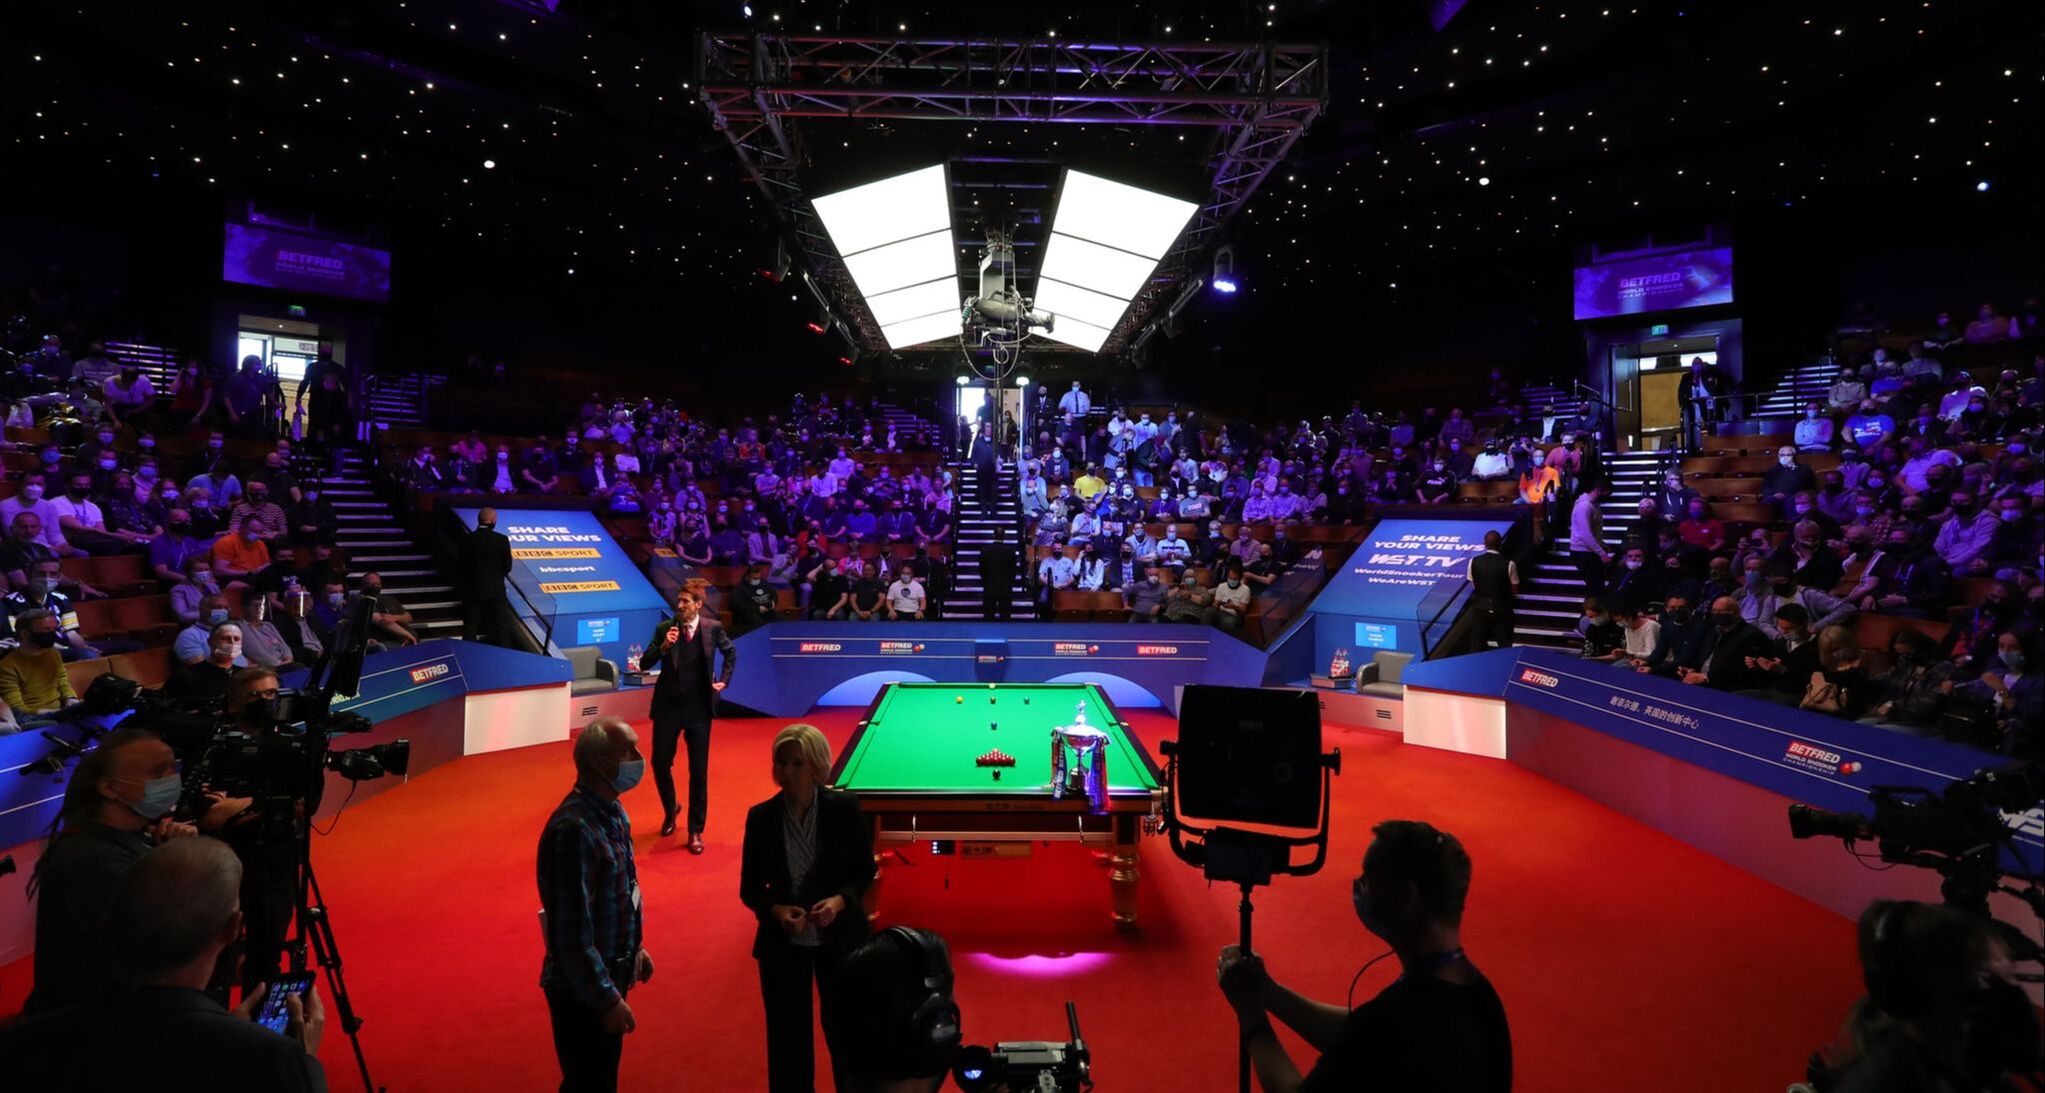 Attend the World Snooker Championship on April 16th in Sheffield, United Kingdom...